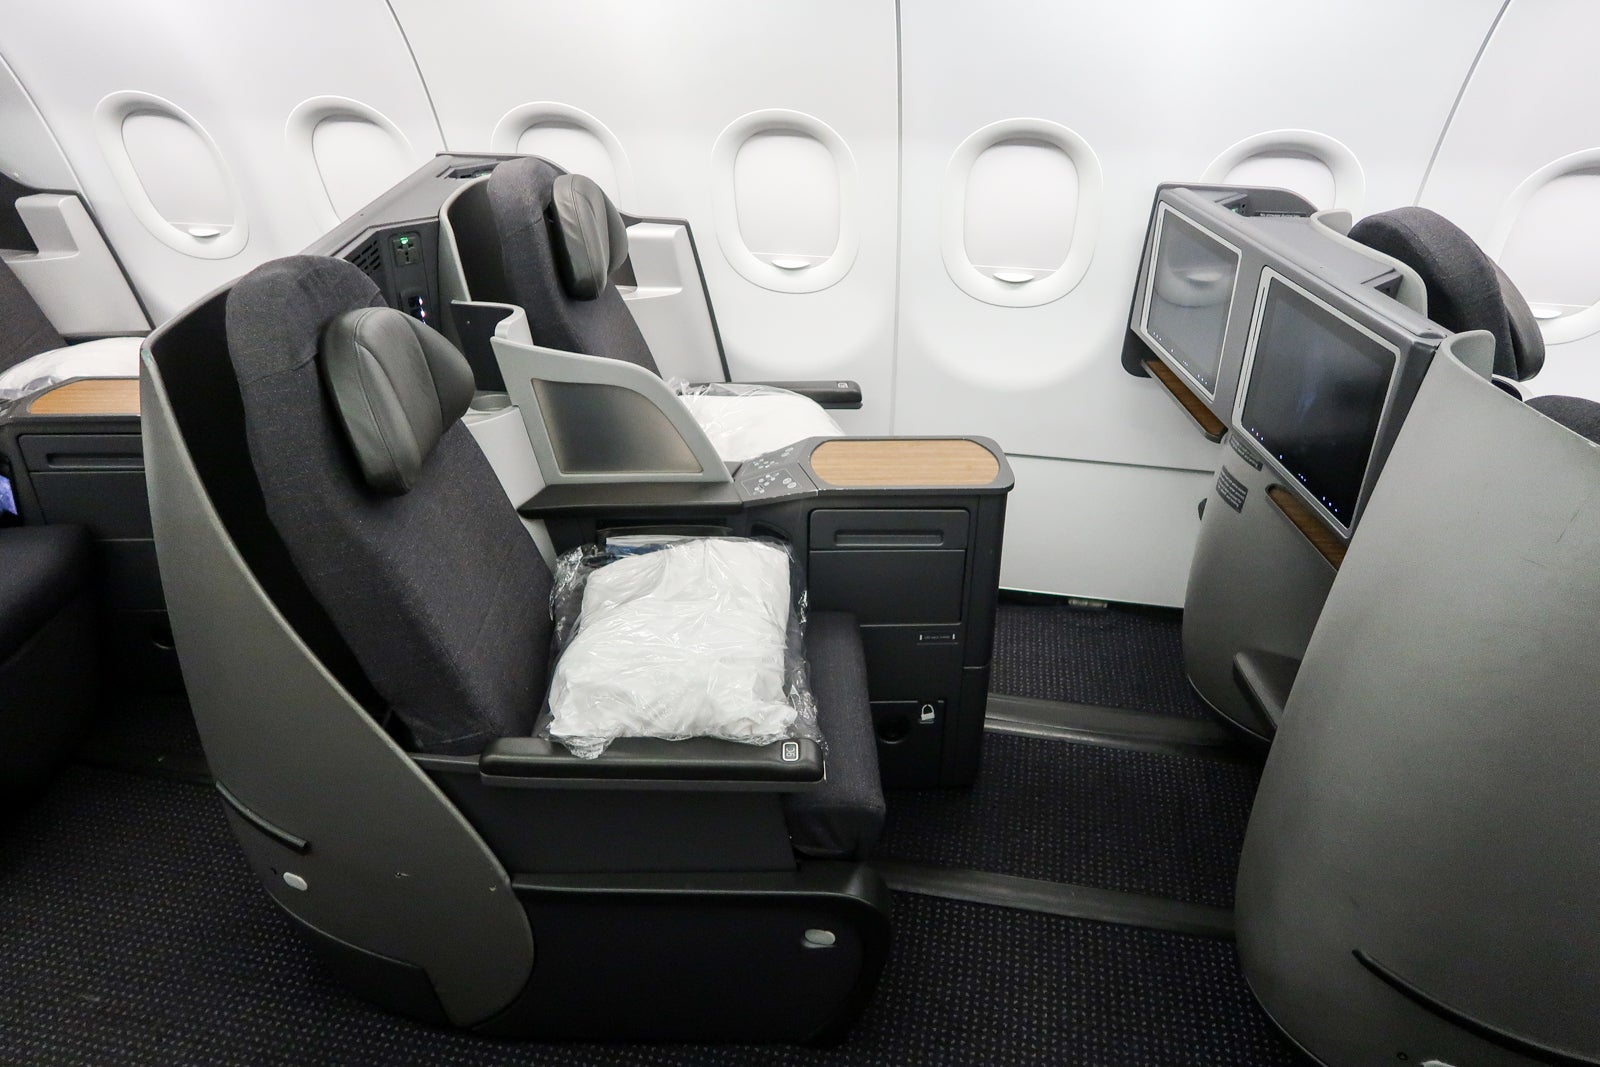 Deal: AA Transcon Flagship Business Class for 25,000 Miles - The Points Guy